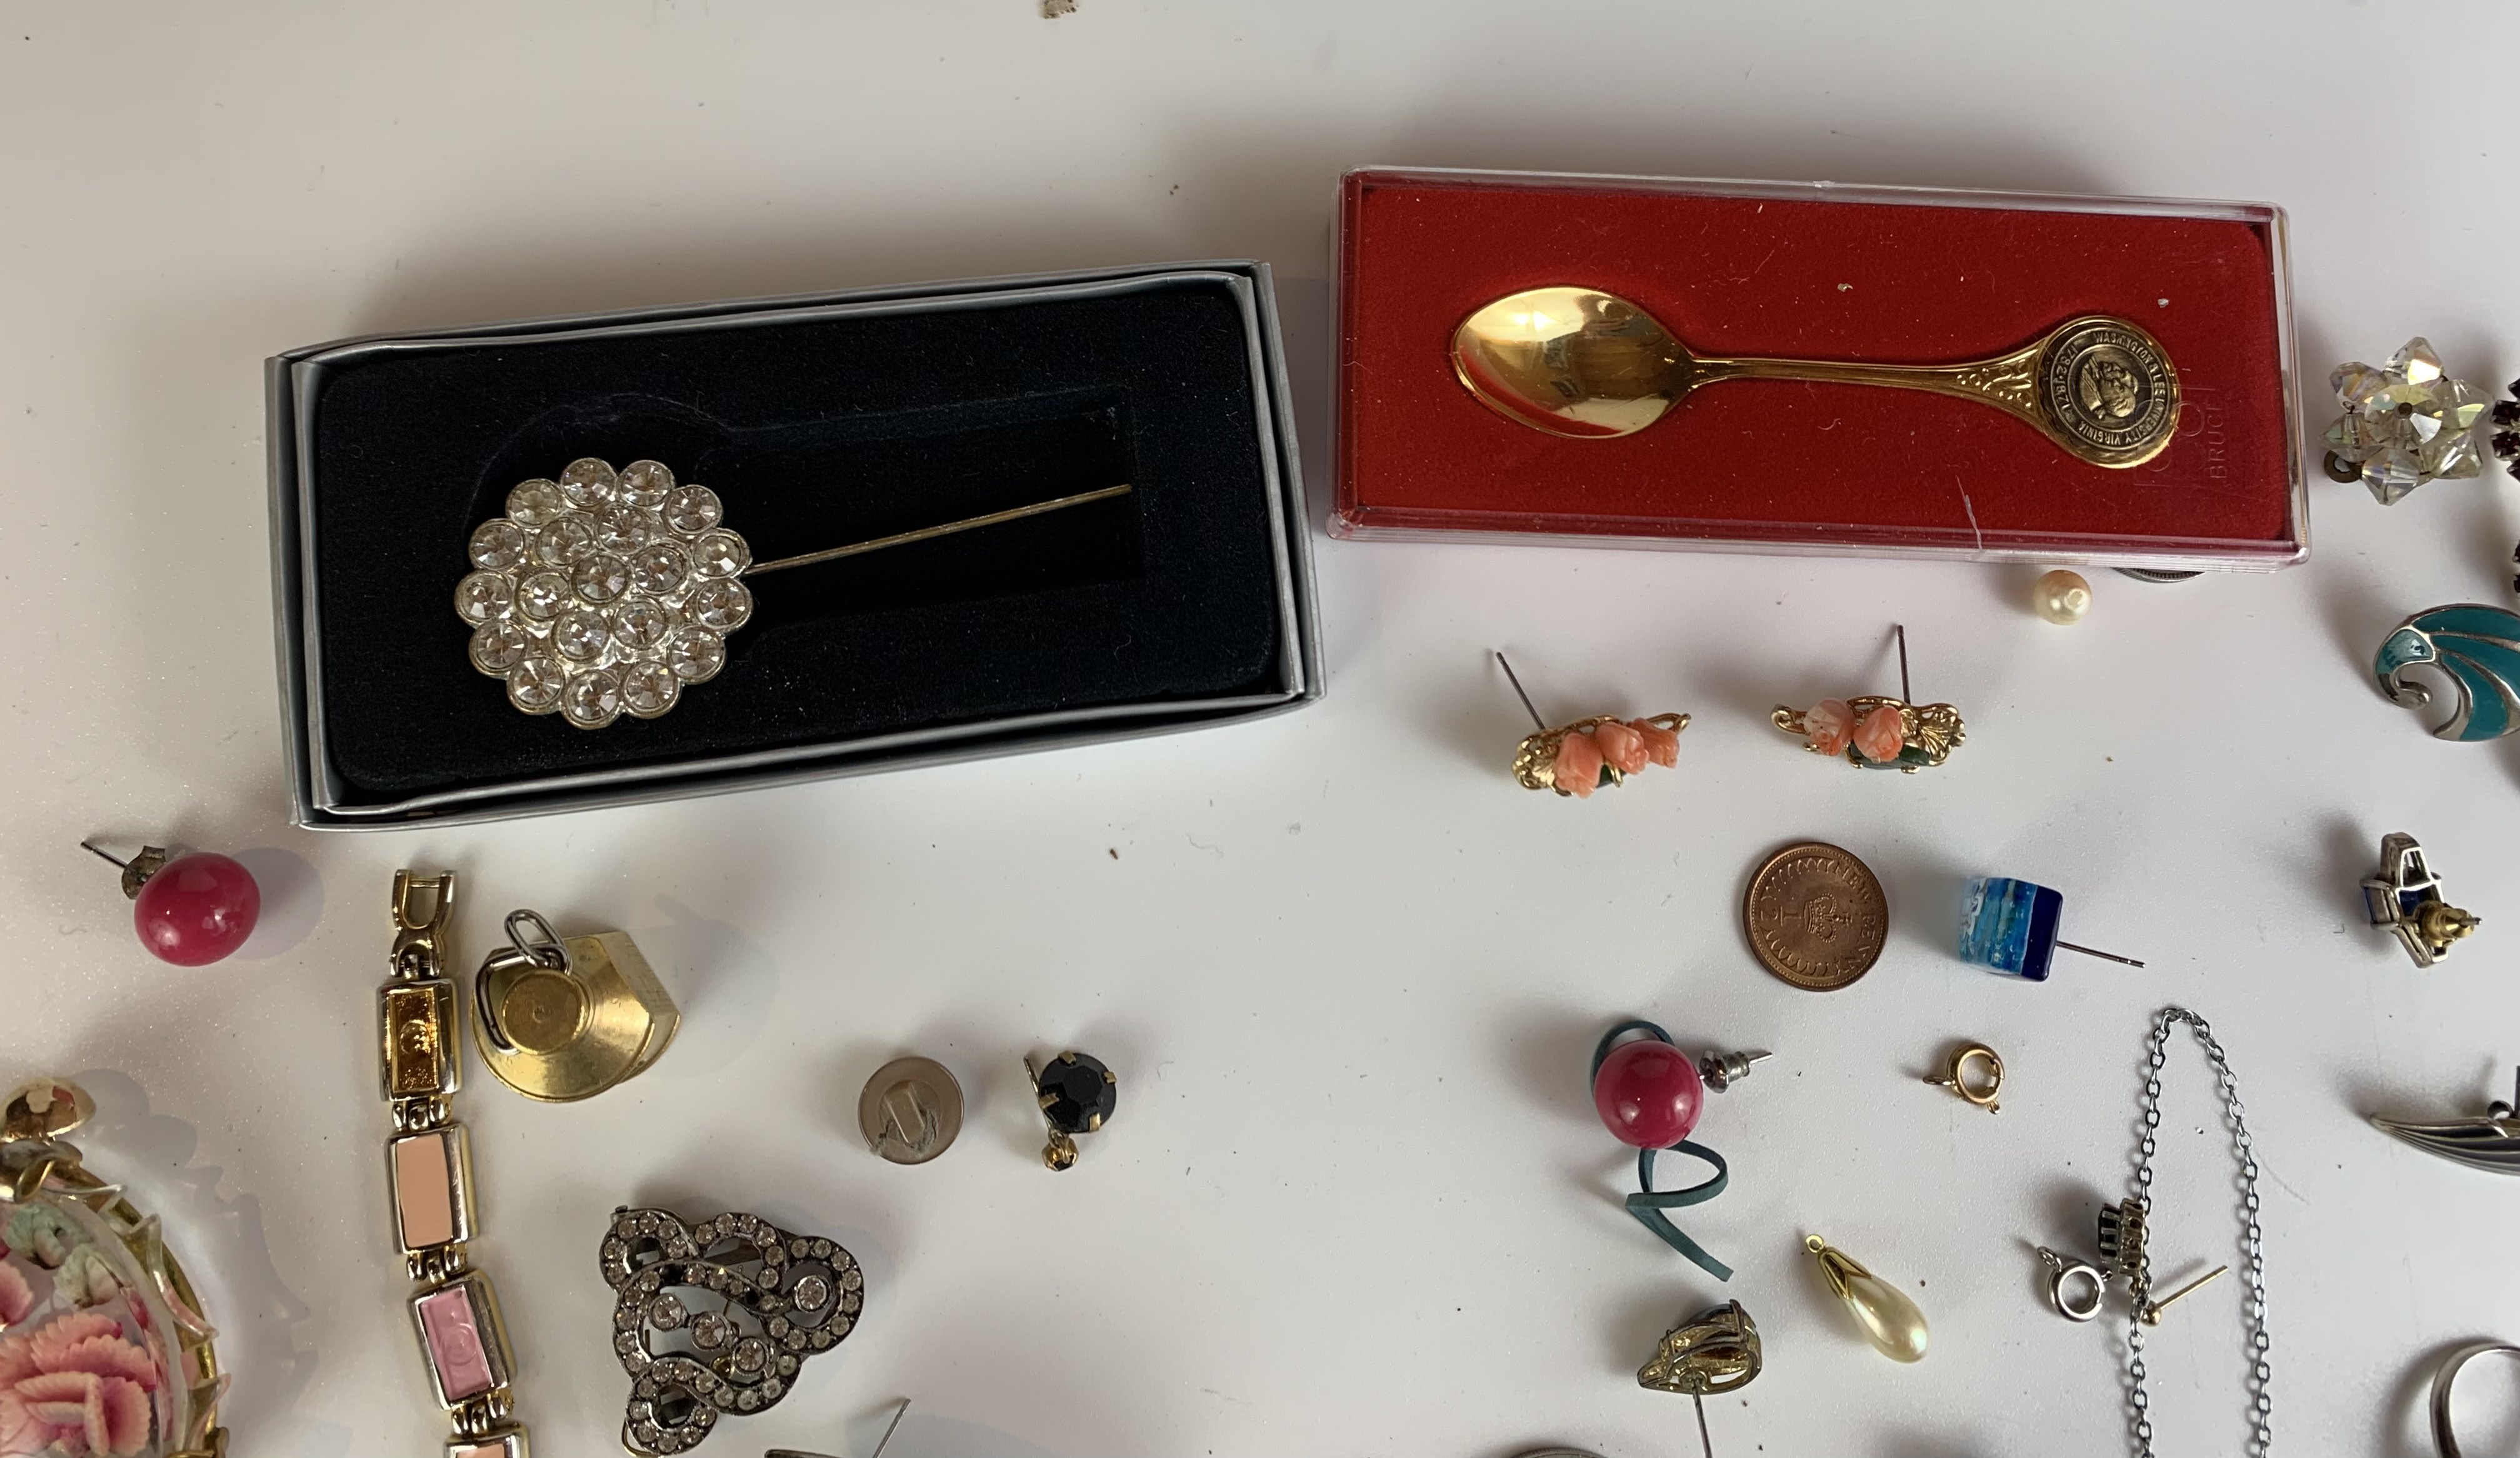 Dress jewellery including brooches, earrings, rings, souvenir spoon, odd coins and Azur watch - Image 9 of 9